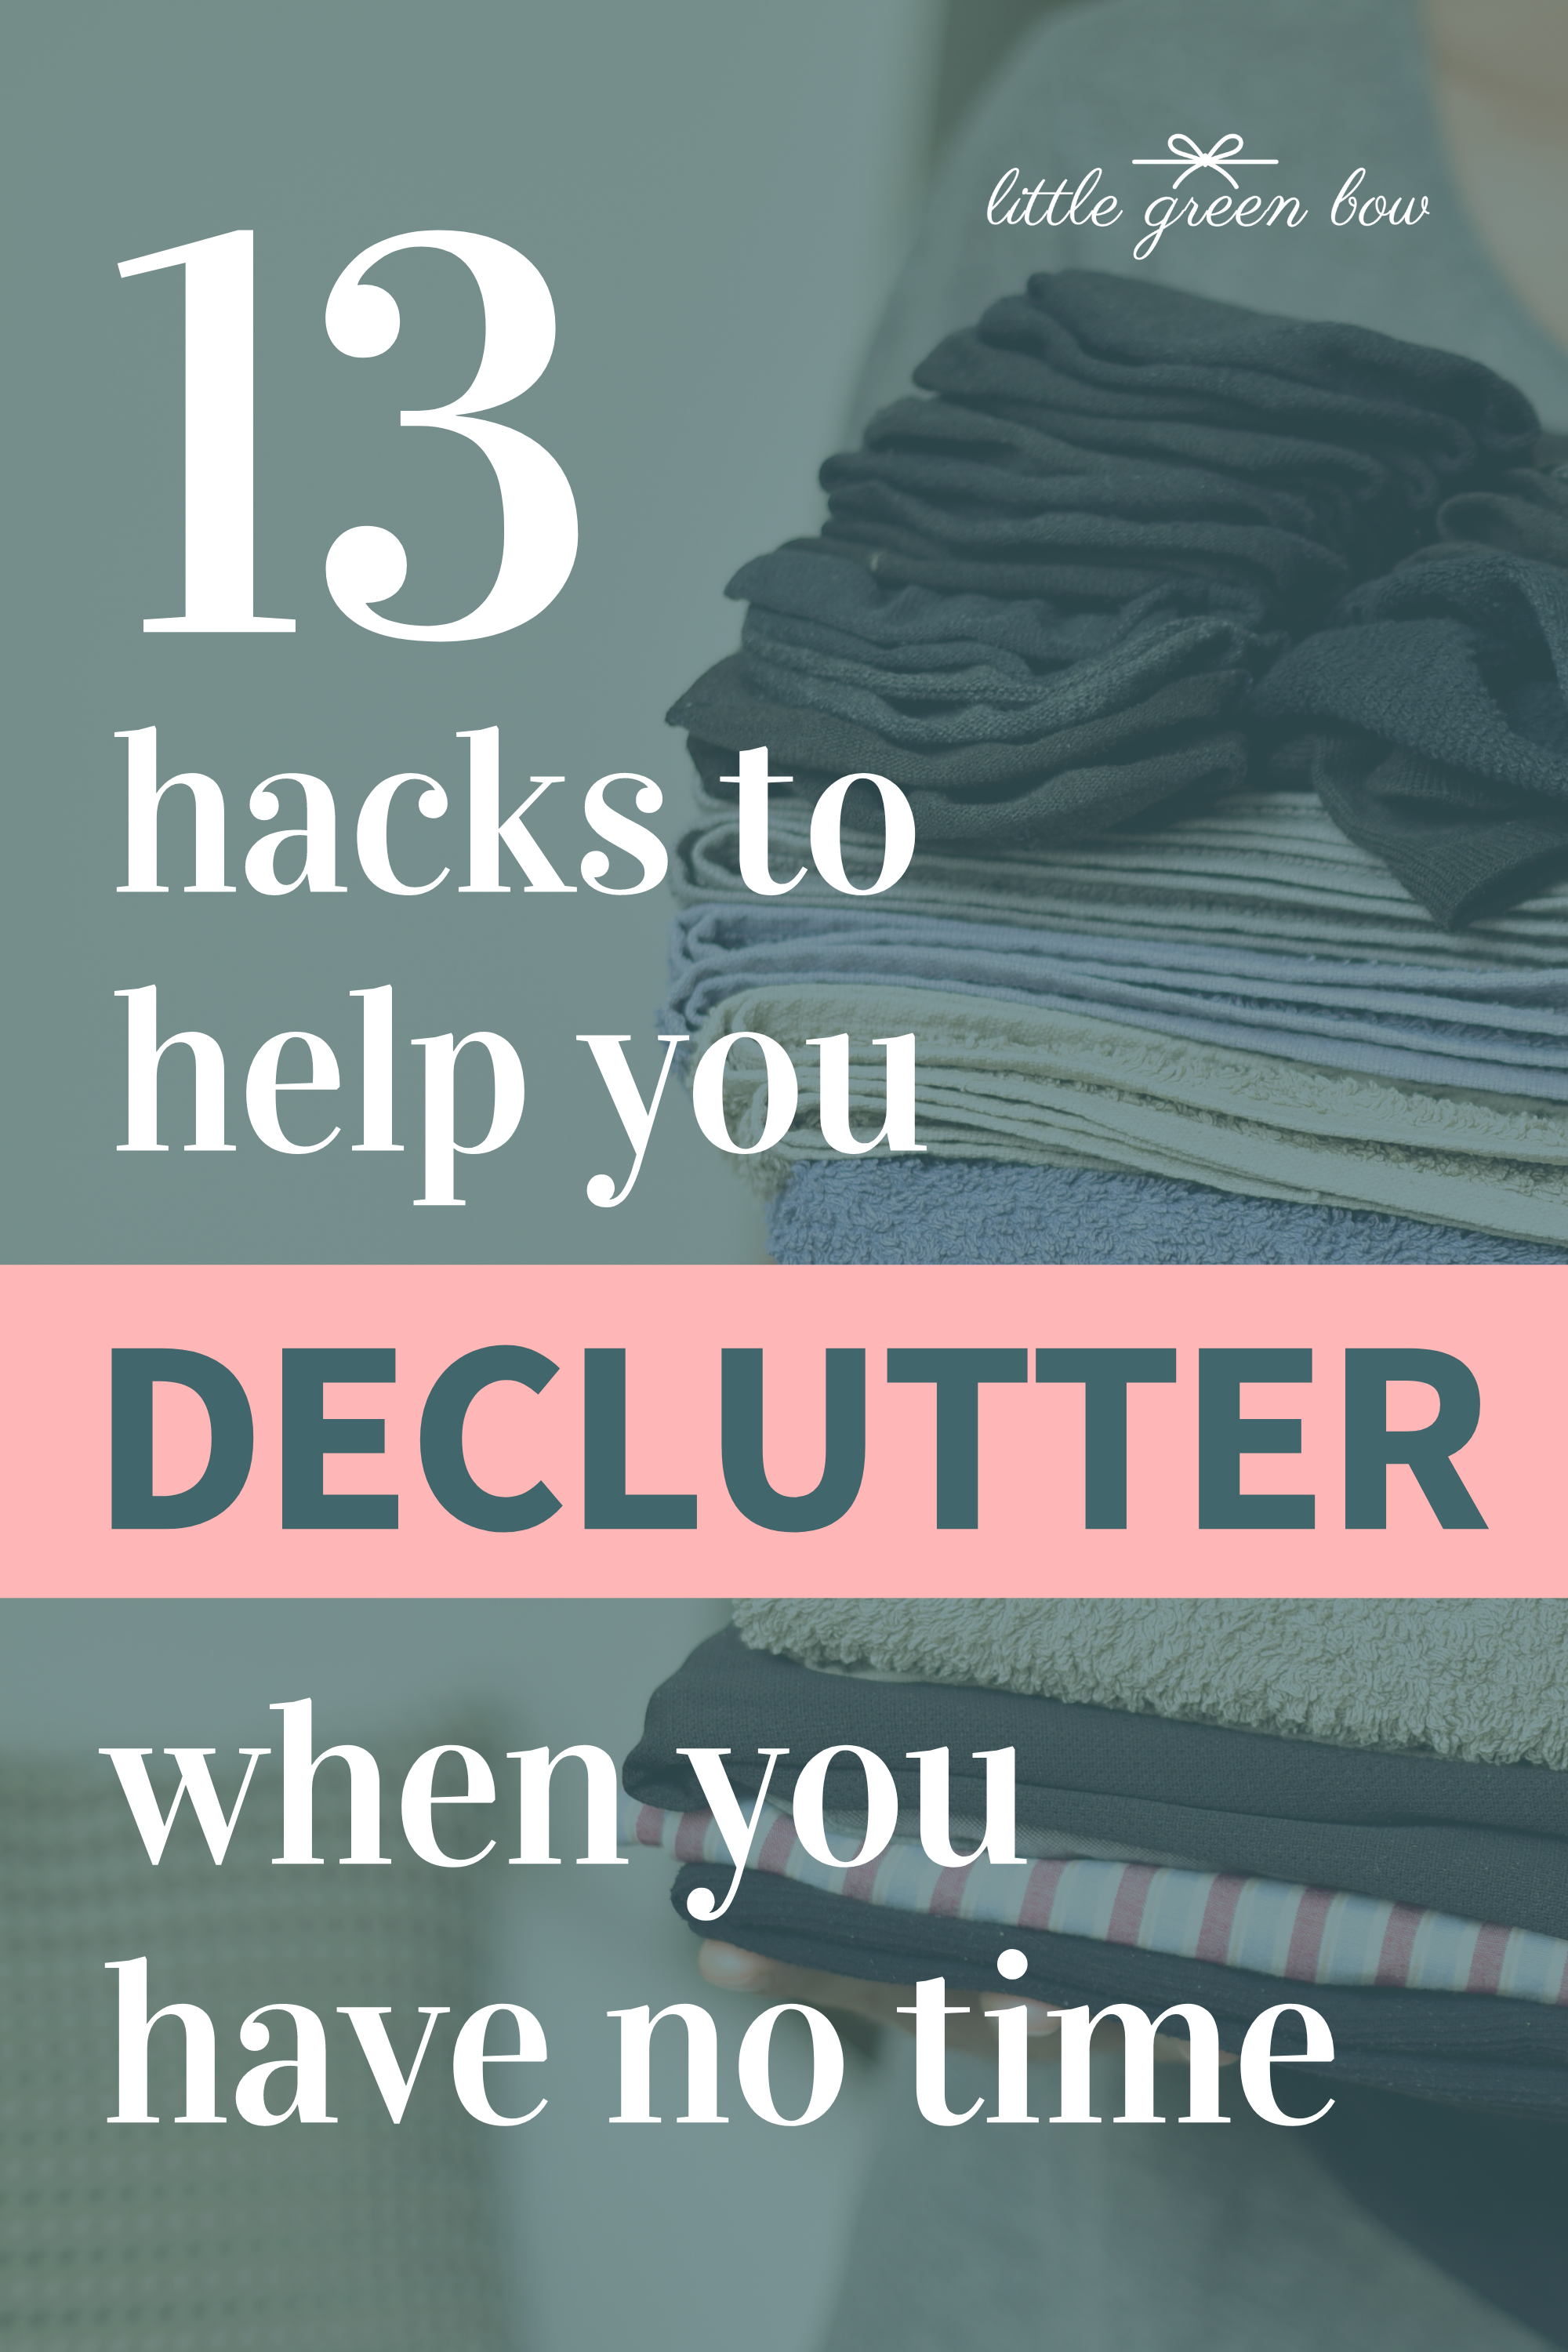 13 Hacks to Help You Declutter When You Have No Time